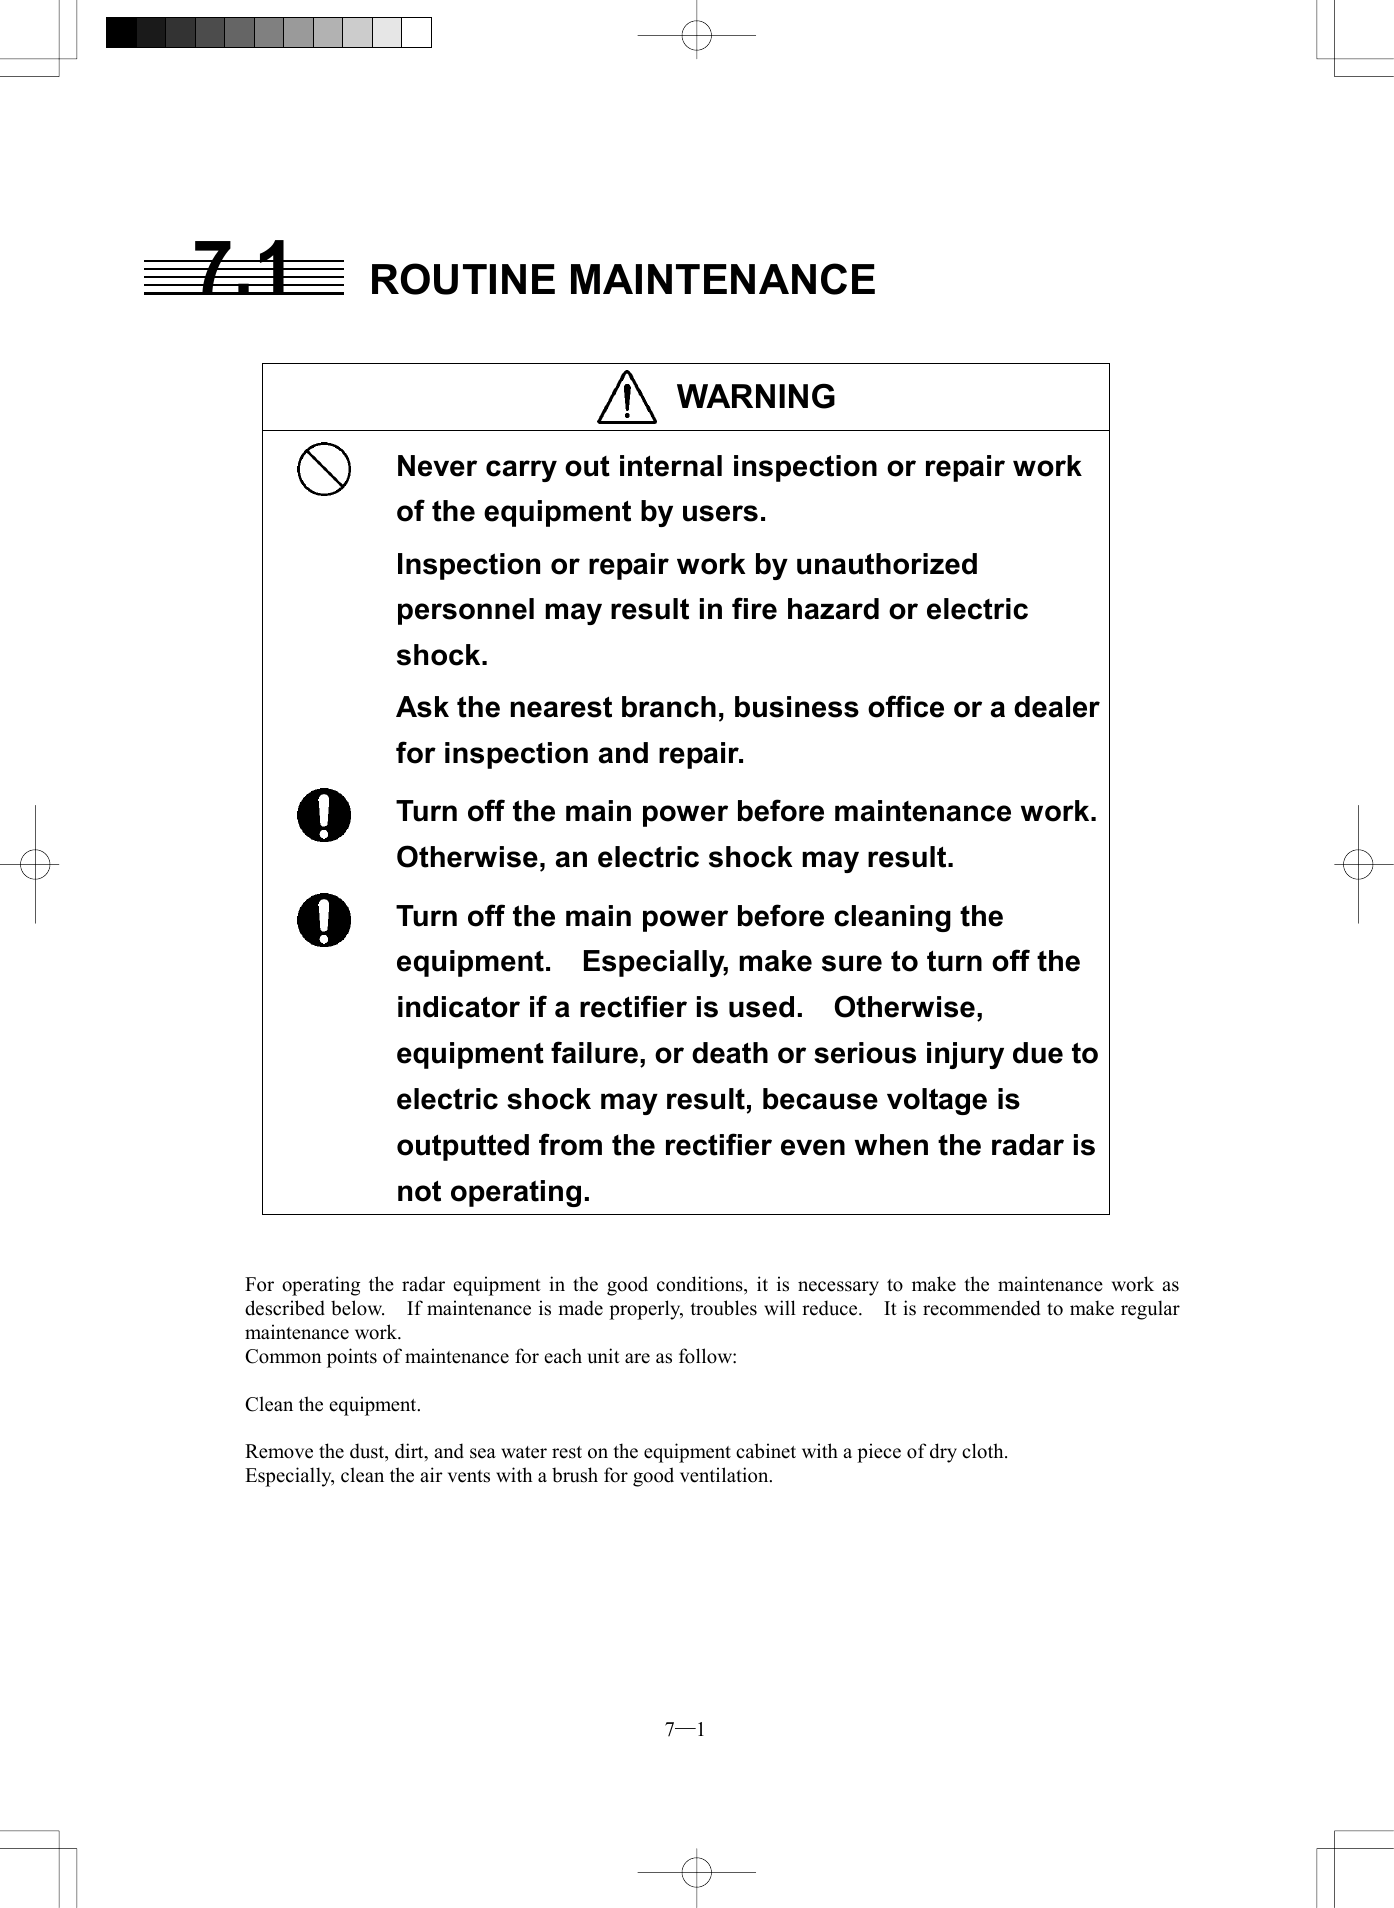  7─1 7.1 ROUTINE MAINTENANCE   WARNING   Never carry out internal inspection or repair work of the equipment by users. Inspection or repair work by unauthorized personnel may result in fire hazard or electric shock. Ask the nearest branch, business office or a dealer for inspection and repair.  Turn off the main power before maintenance work. Otherwise, an electric shock may result.  Turn off the main power before cleaning the equipment.  Especially, make sure to turn off the indicator if a rectifier is used.    Otherwise, equipment failure, or death or serious injury due to electric shock may result, because voltage is outputted from the rectifier even when the radar is not operating.   For operating the radar equipment in the good conditions, it is necessary to make the maintenance work as described below.    If maintenance is made properly, troubles will reduce.    It is recommended to make regular maintenance work. Common points of maintenance for each unit are as follow:  Clean the equipment.  Remove the dust, dirt, and sea water rest on the equipment cabinet with a piece of dry cloth. Especially, clean the air vents with a brush for good ventilation.  